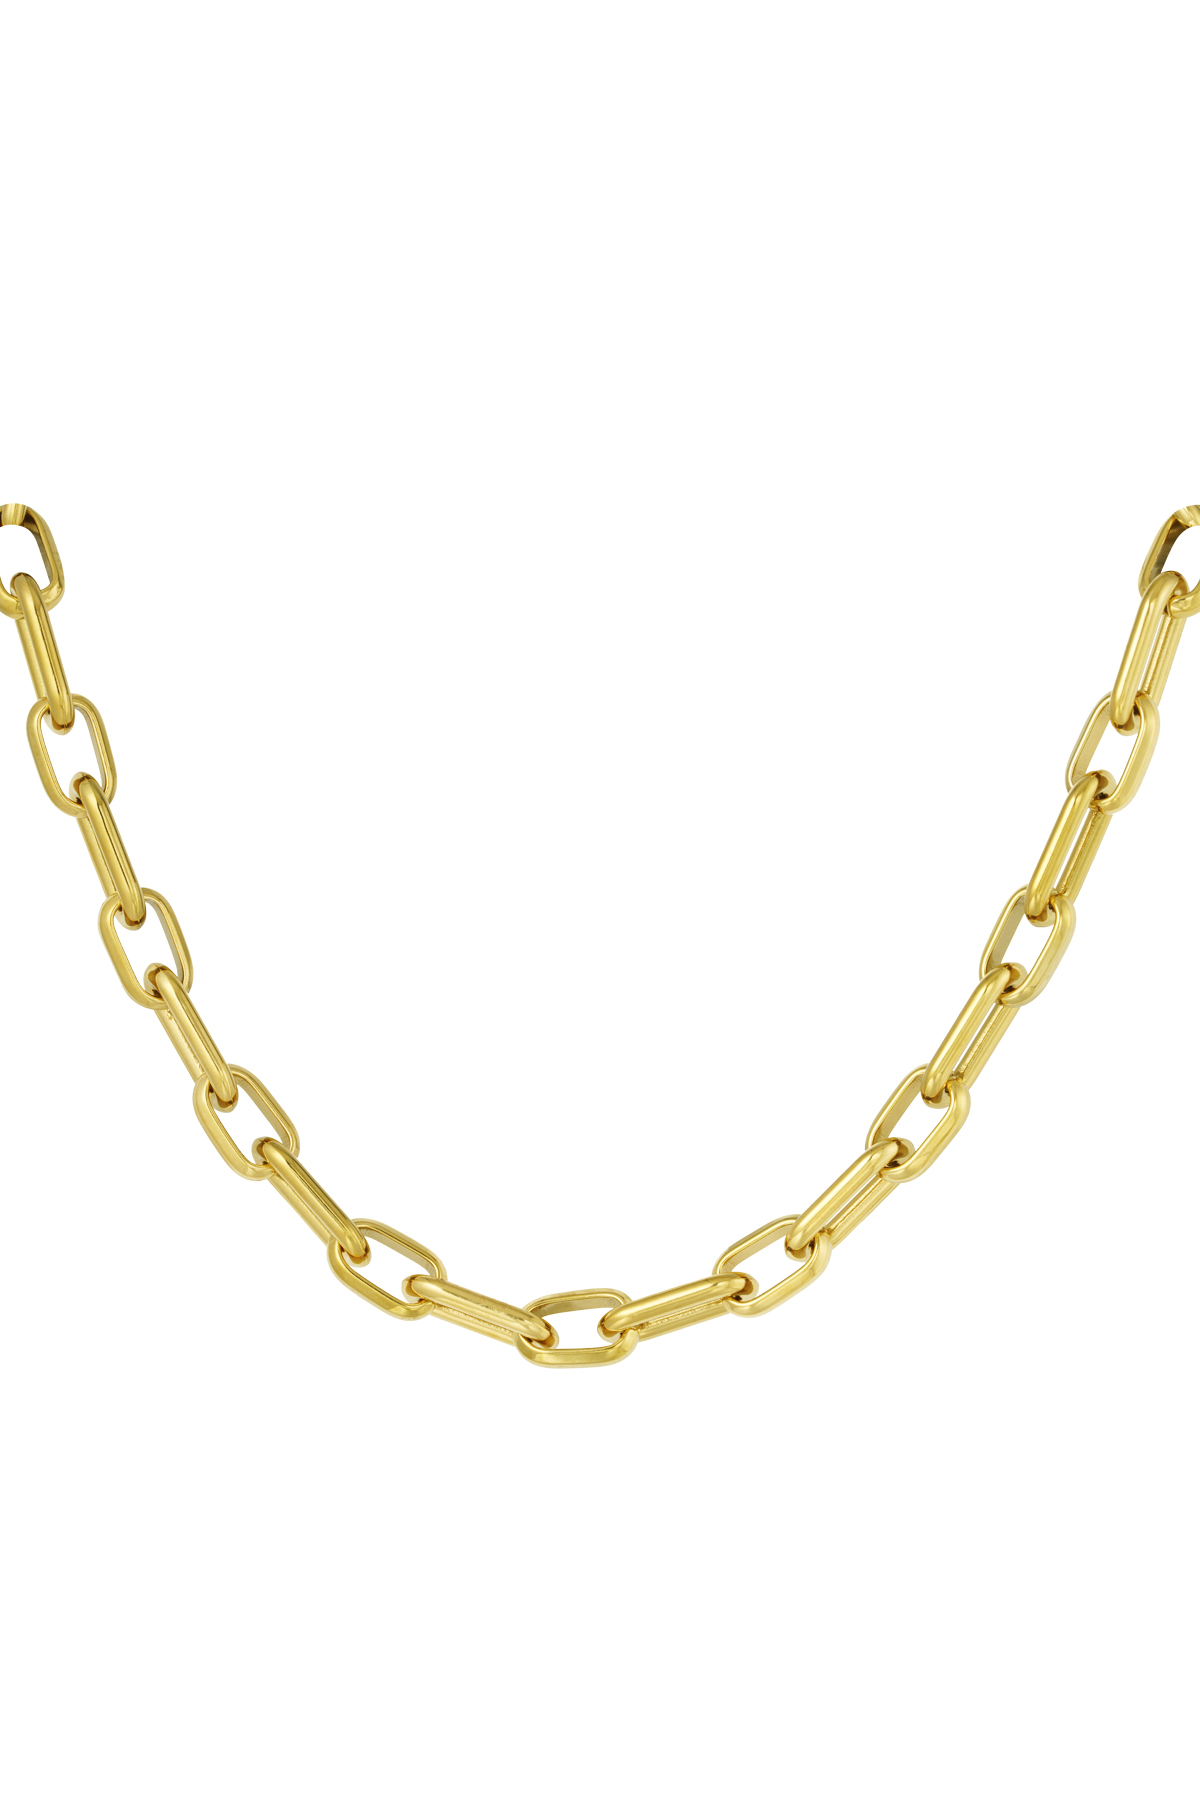 Necklace elongated links with charms - gold